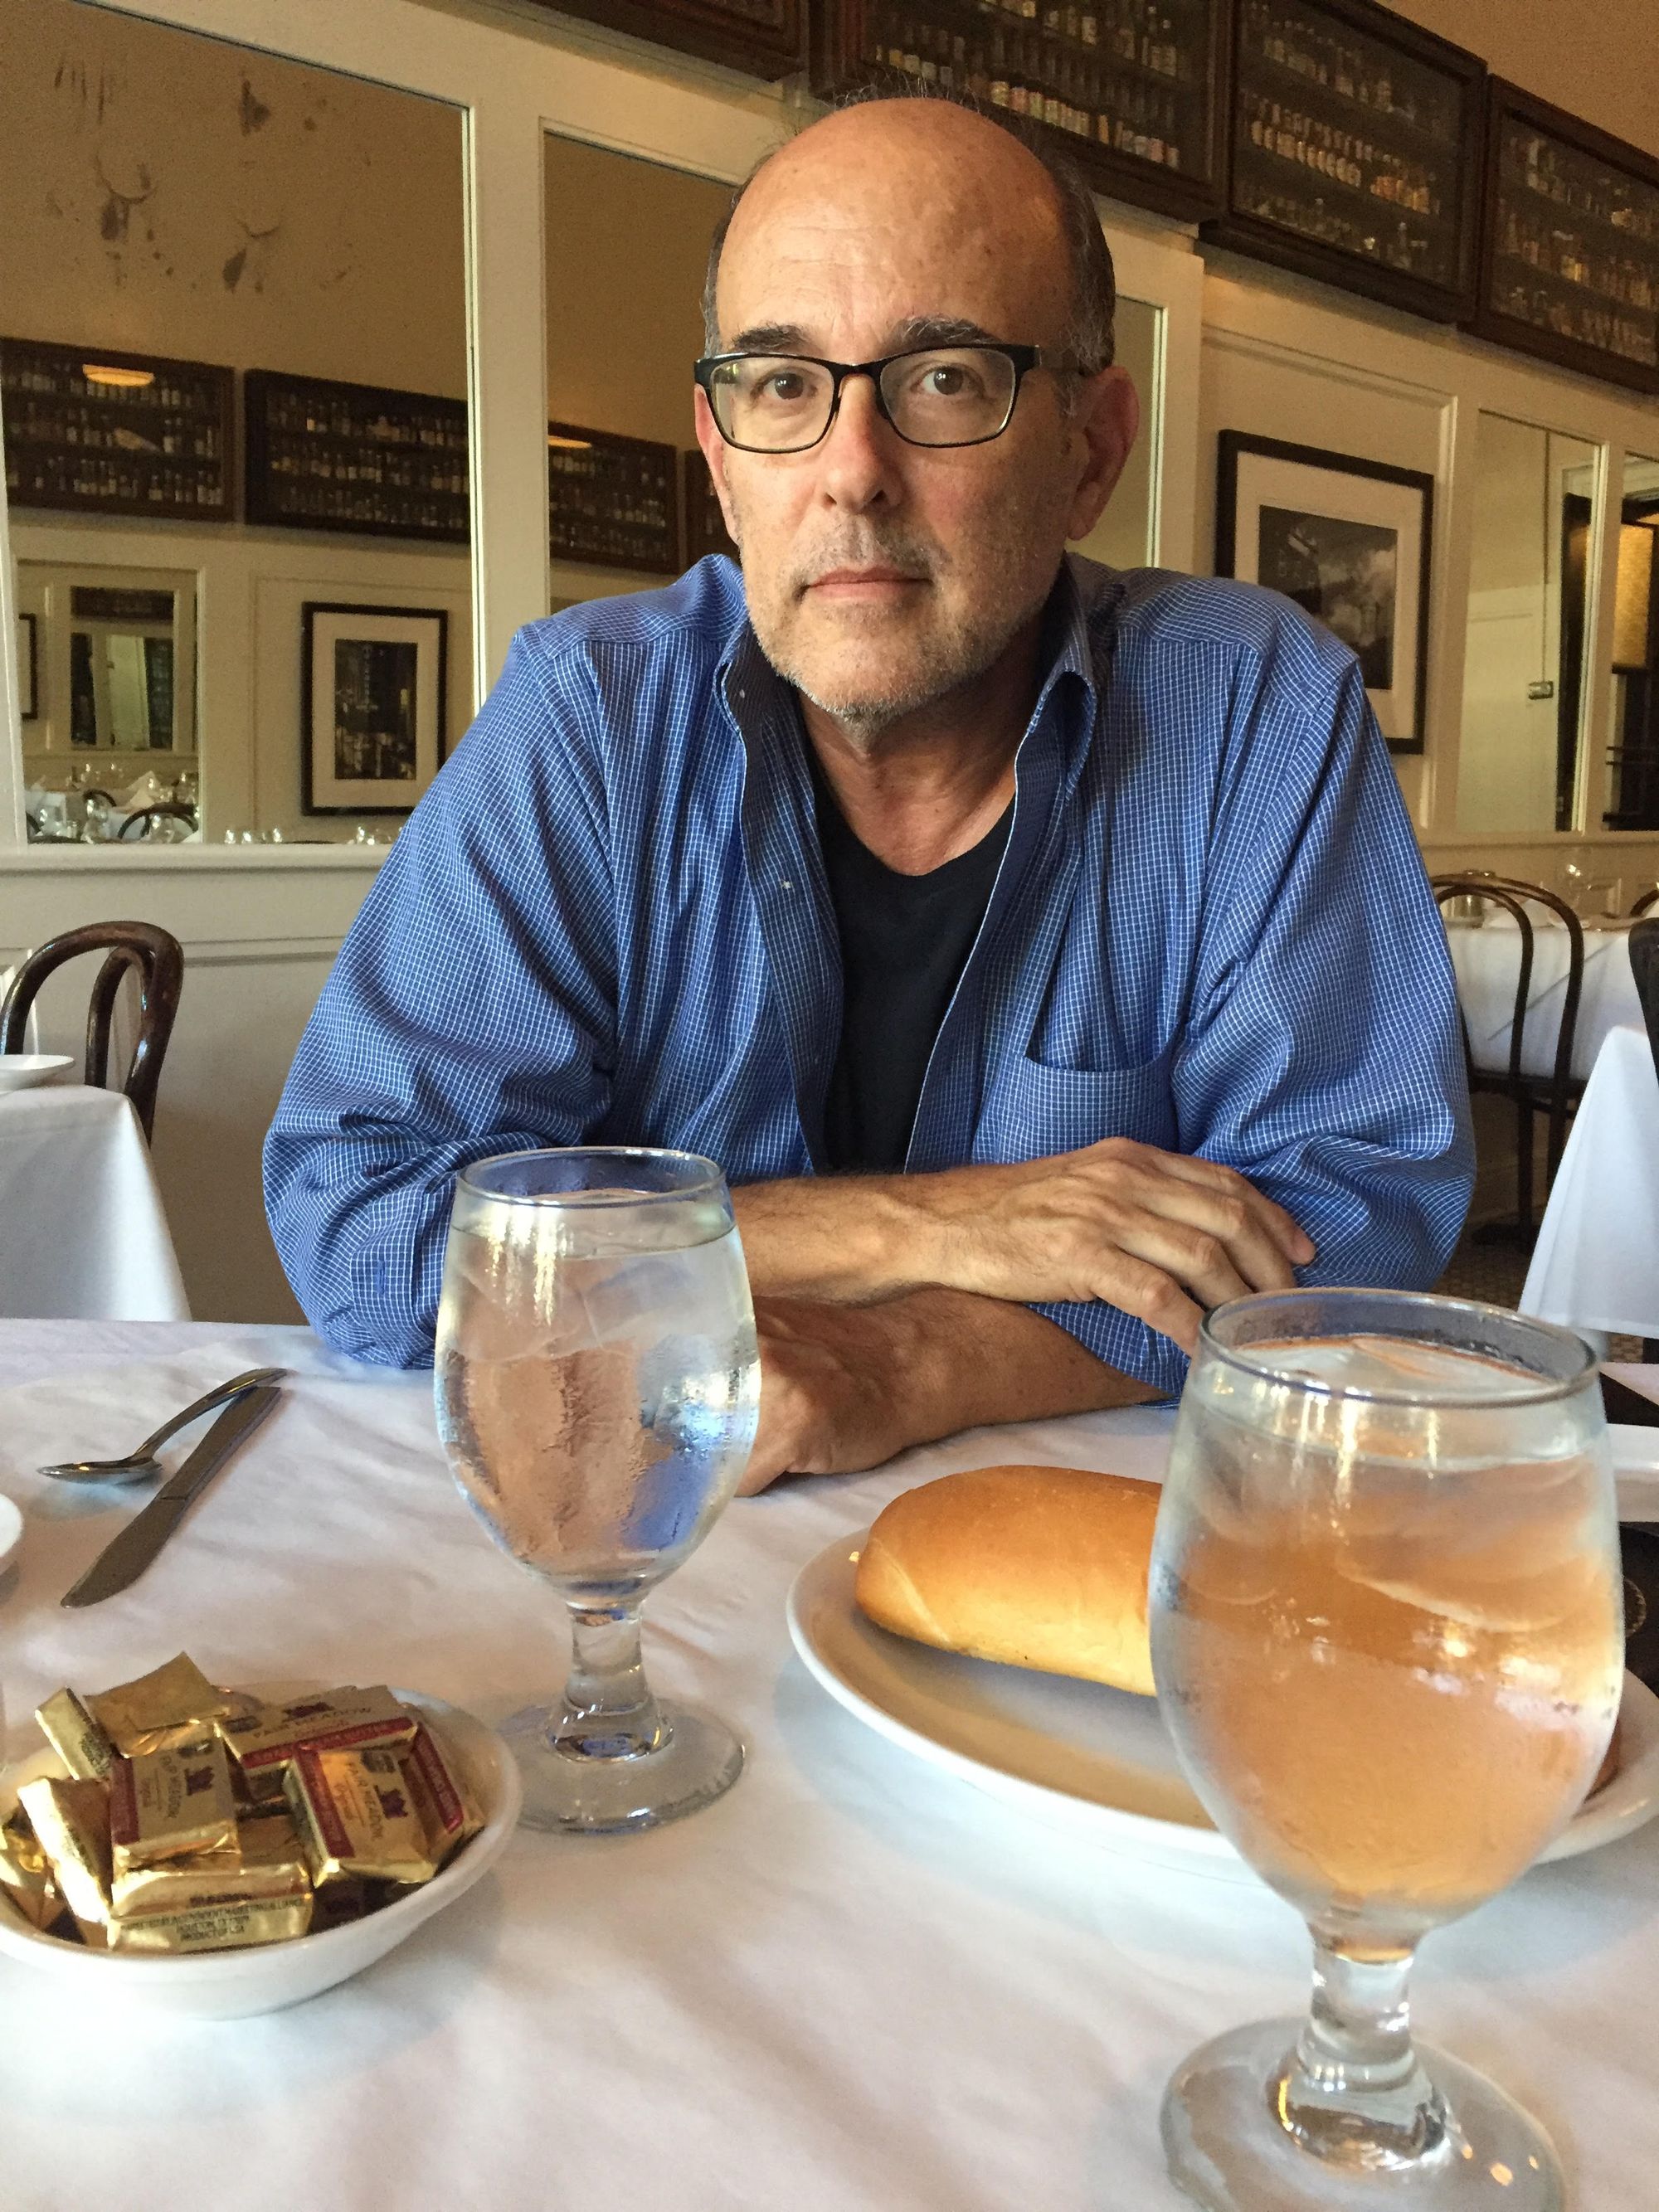 Novelist and TV Writer Tom Piazza Explores the Writing Process